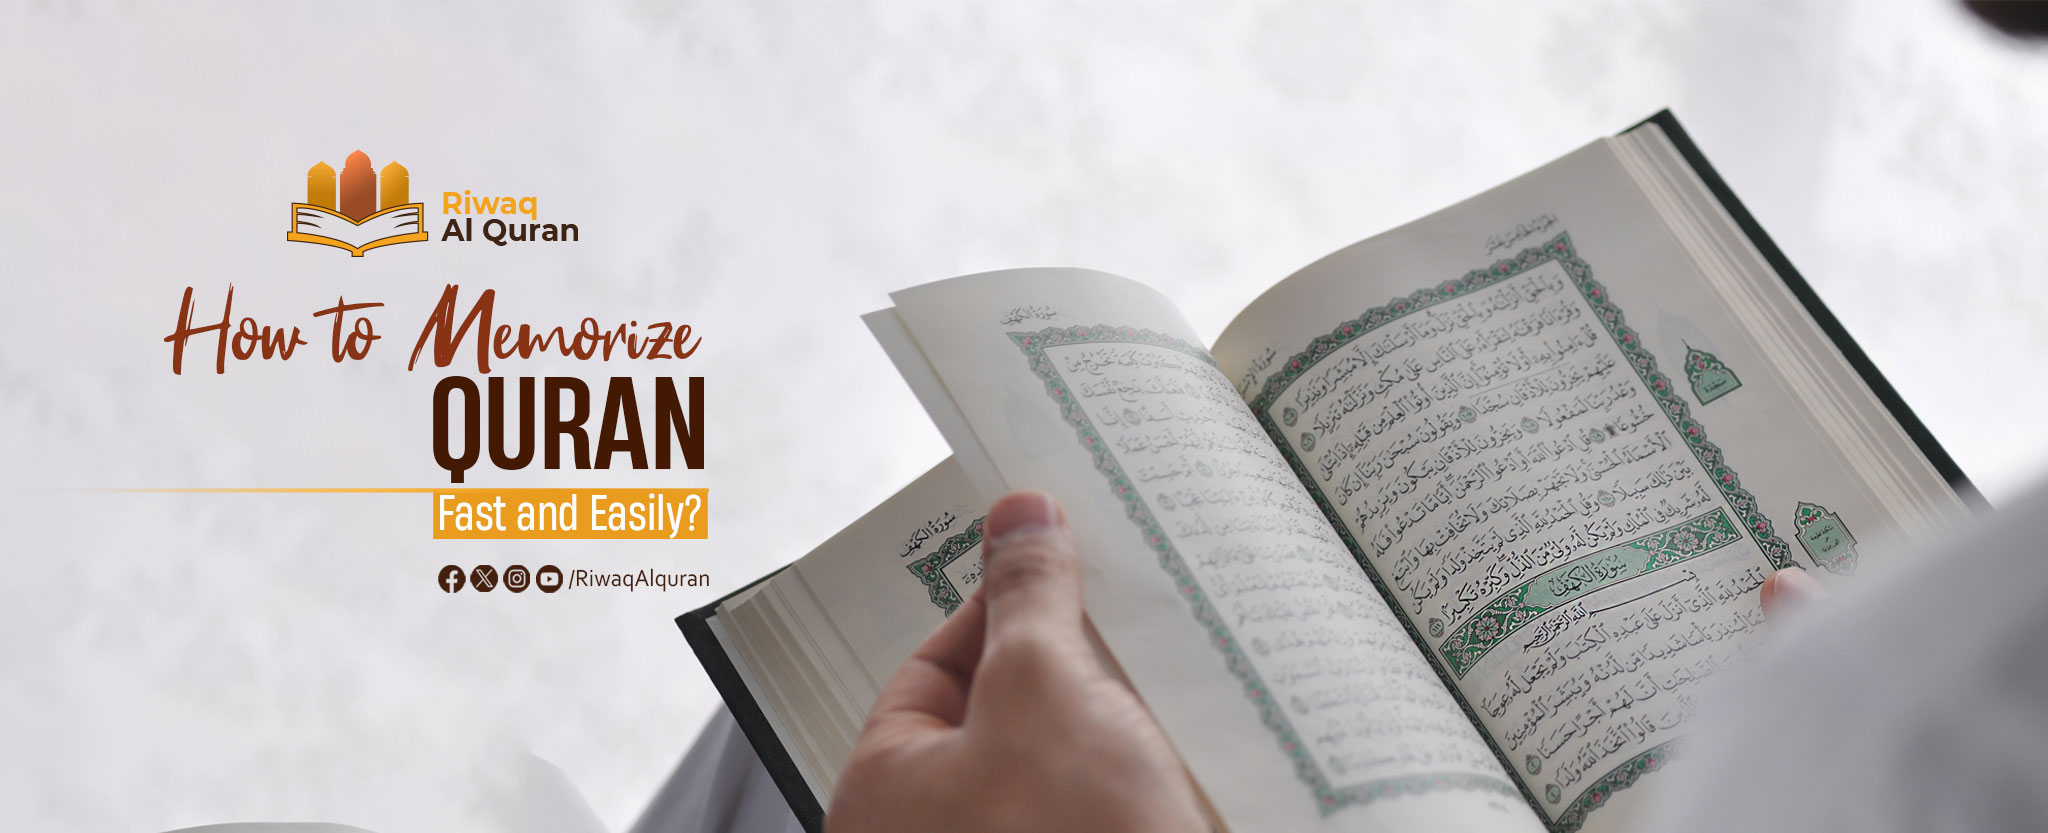 How To Memorize / Hifz Quran Fast And Easily? - In A Very Short Time!